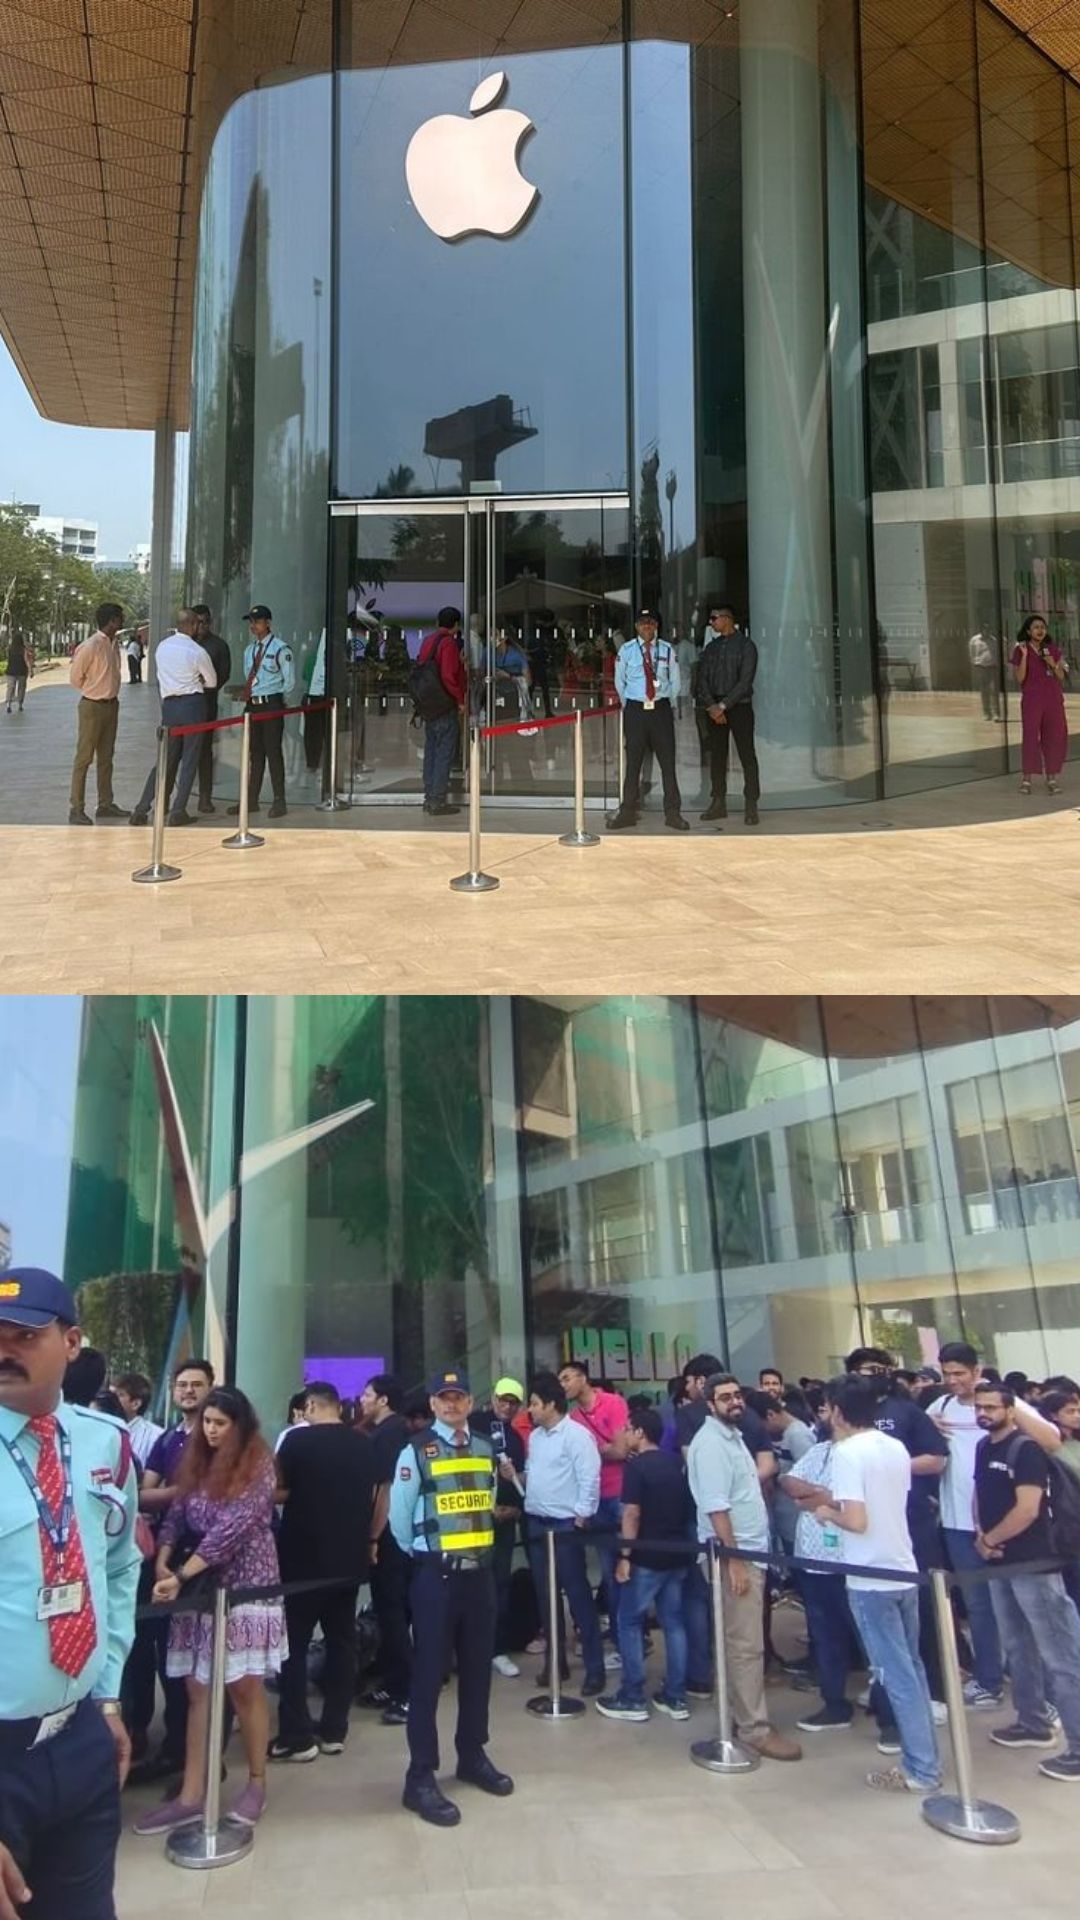 Apple store in Mumbai officially opens the doors: Here are the first images 